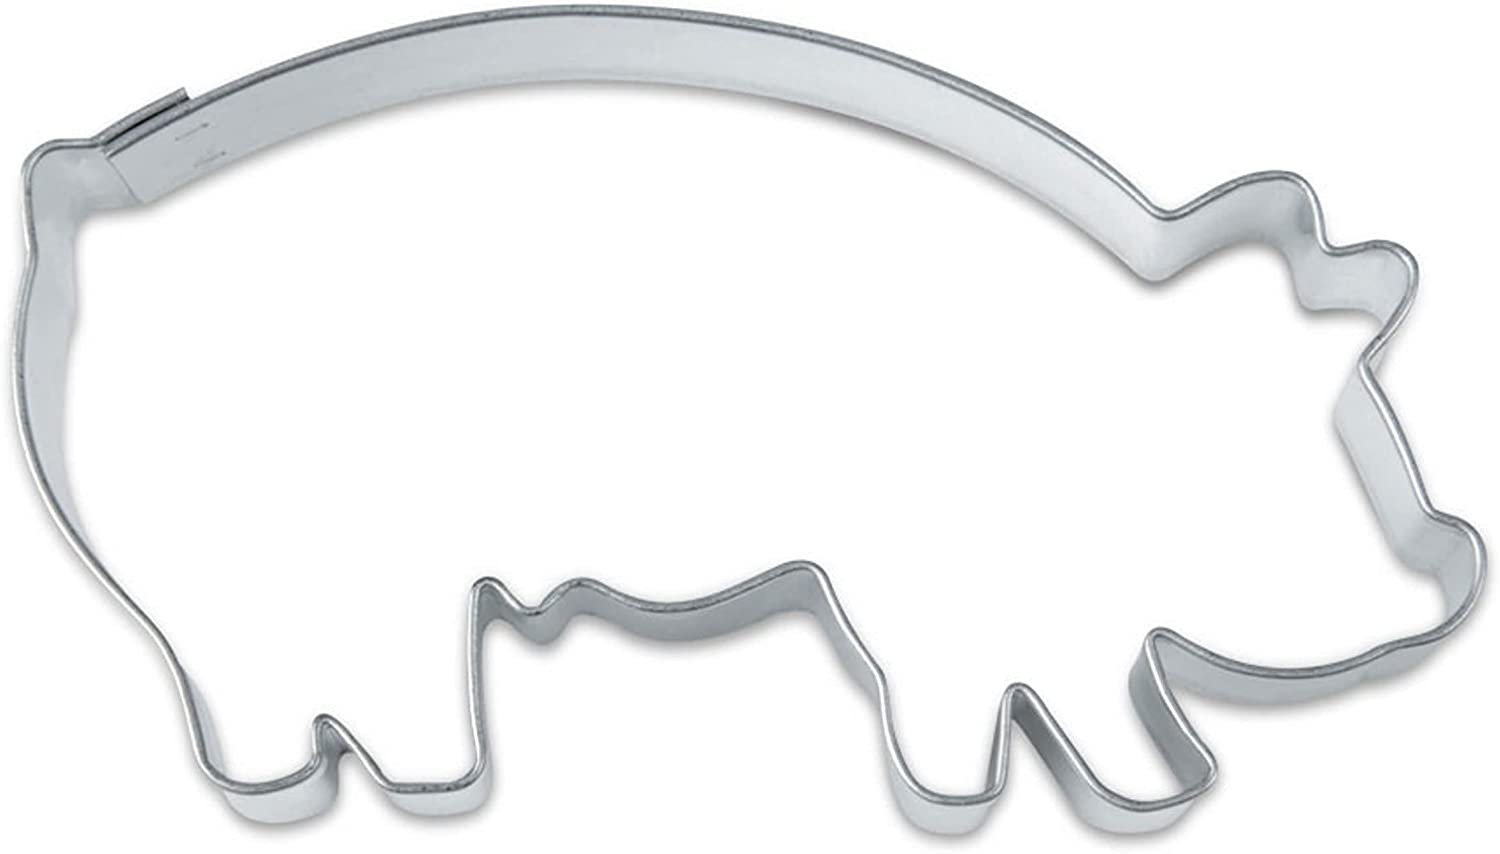 Staedter Städter Lucky Pig Cookie Cutter 8 cm Stainless Steel